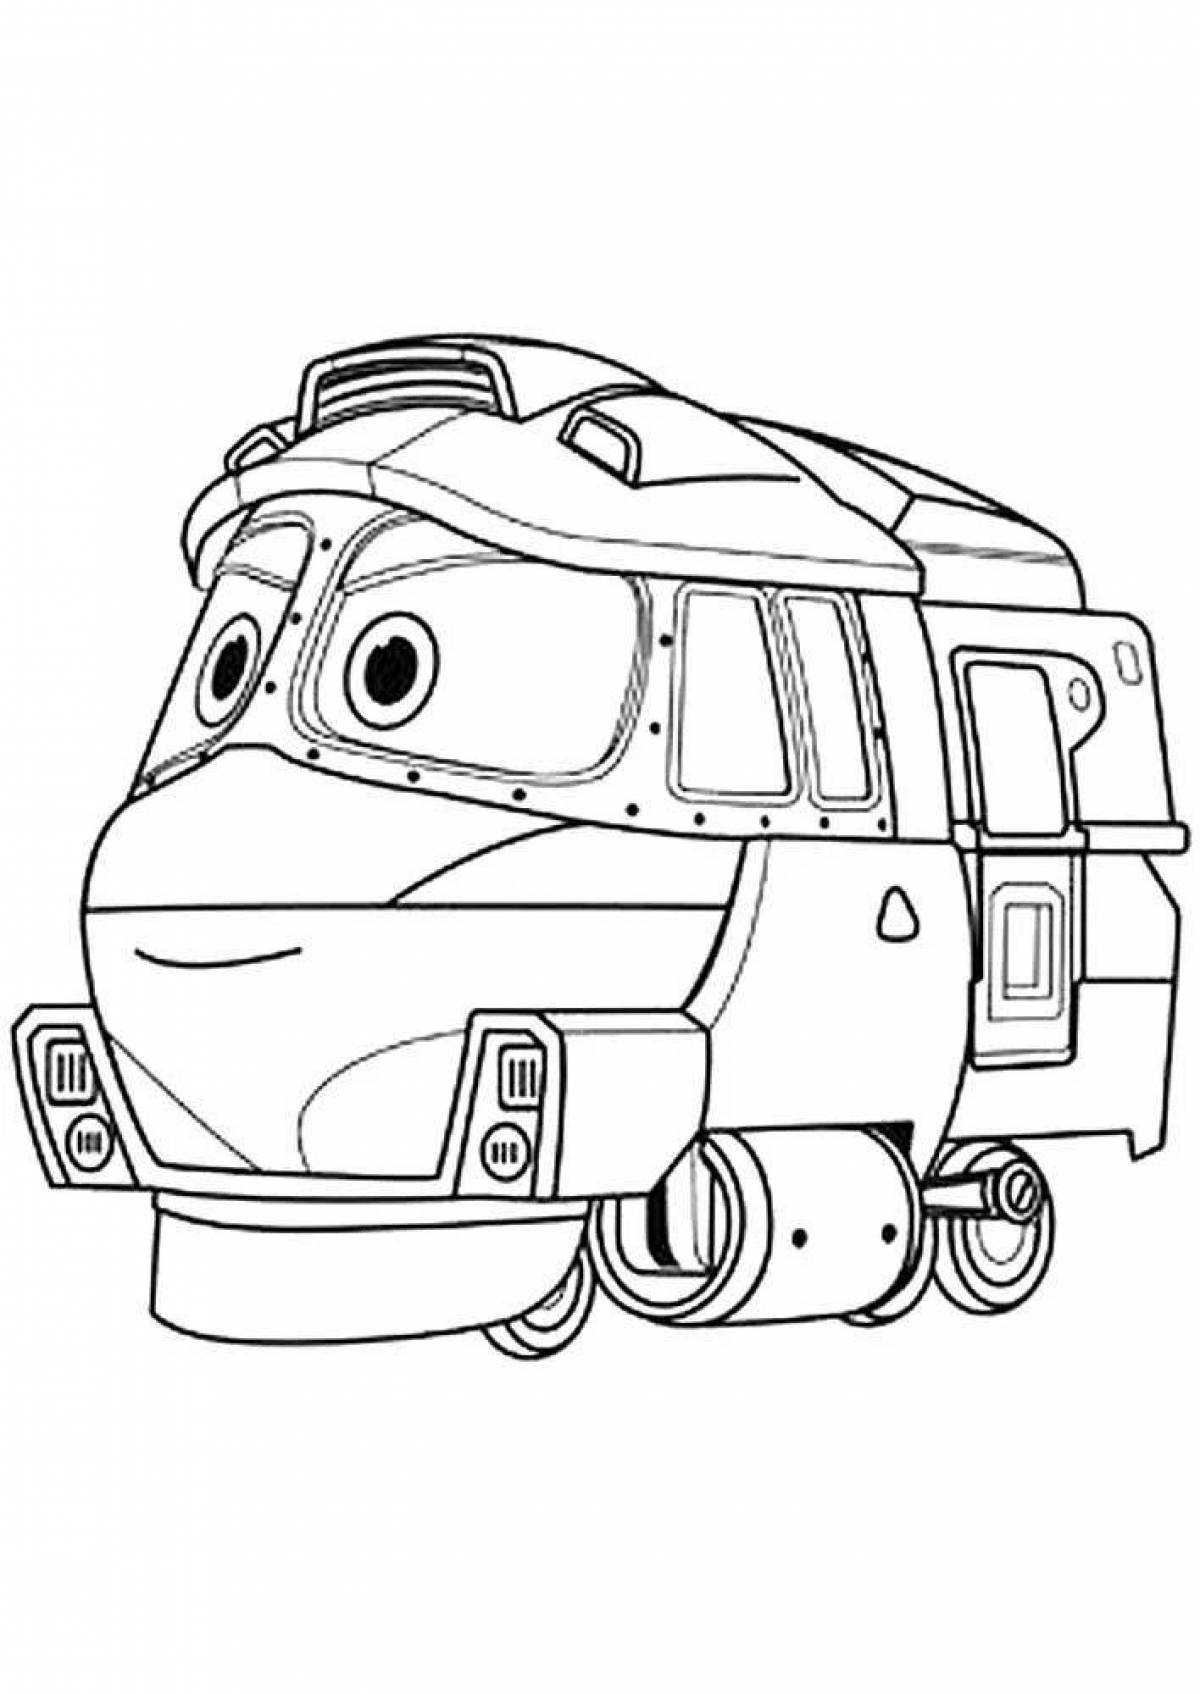 Kay train coloring book in color pack